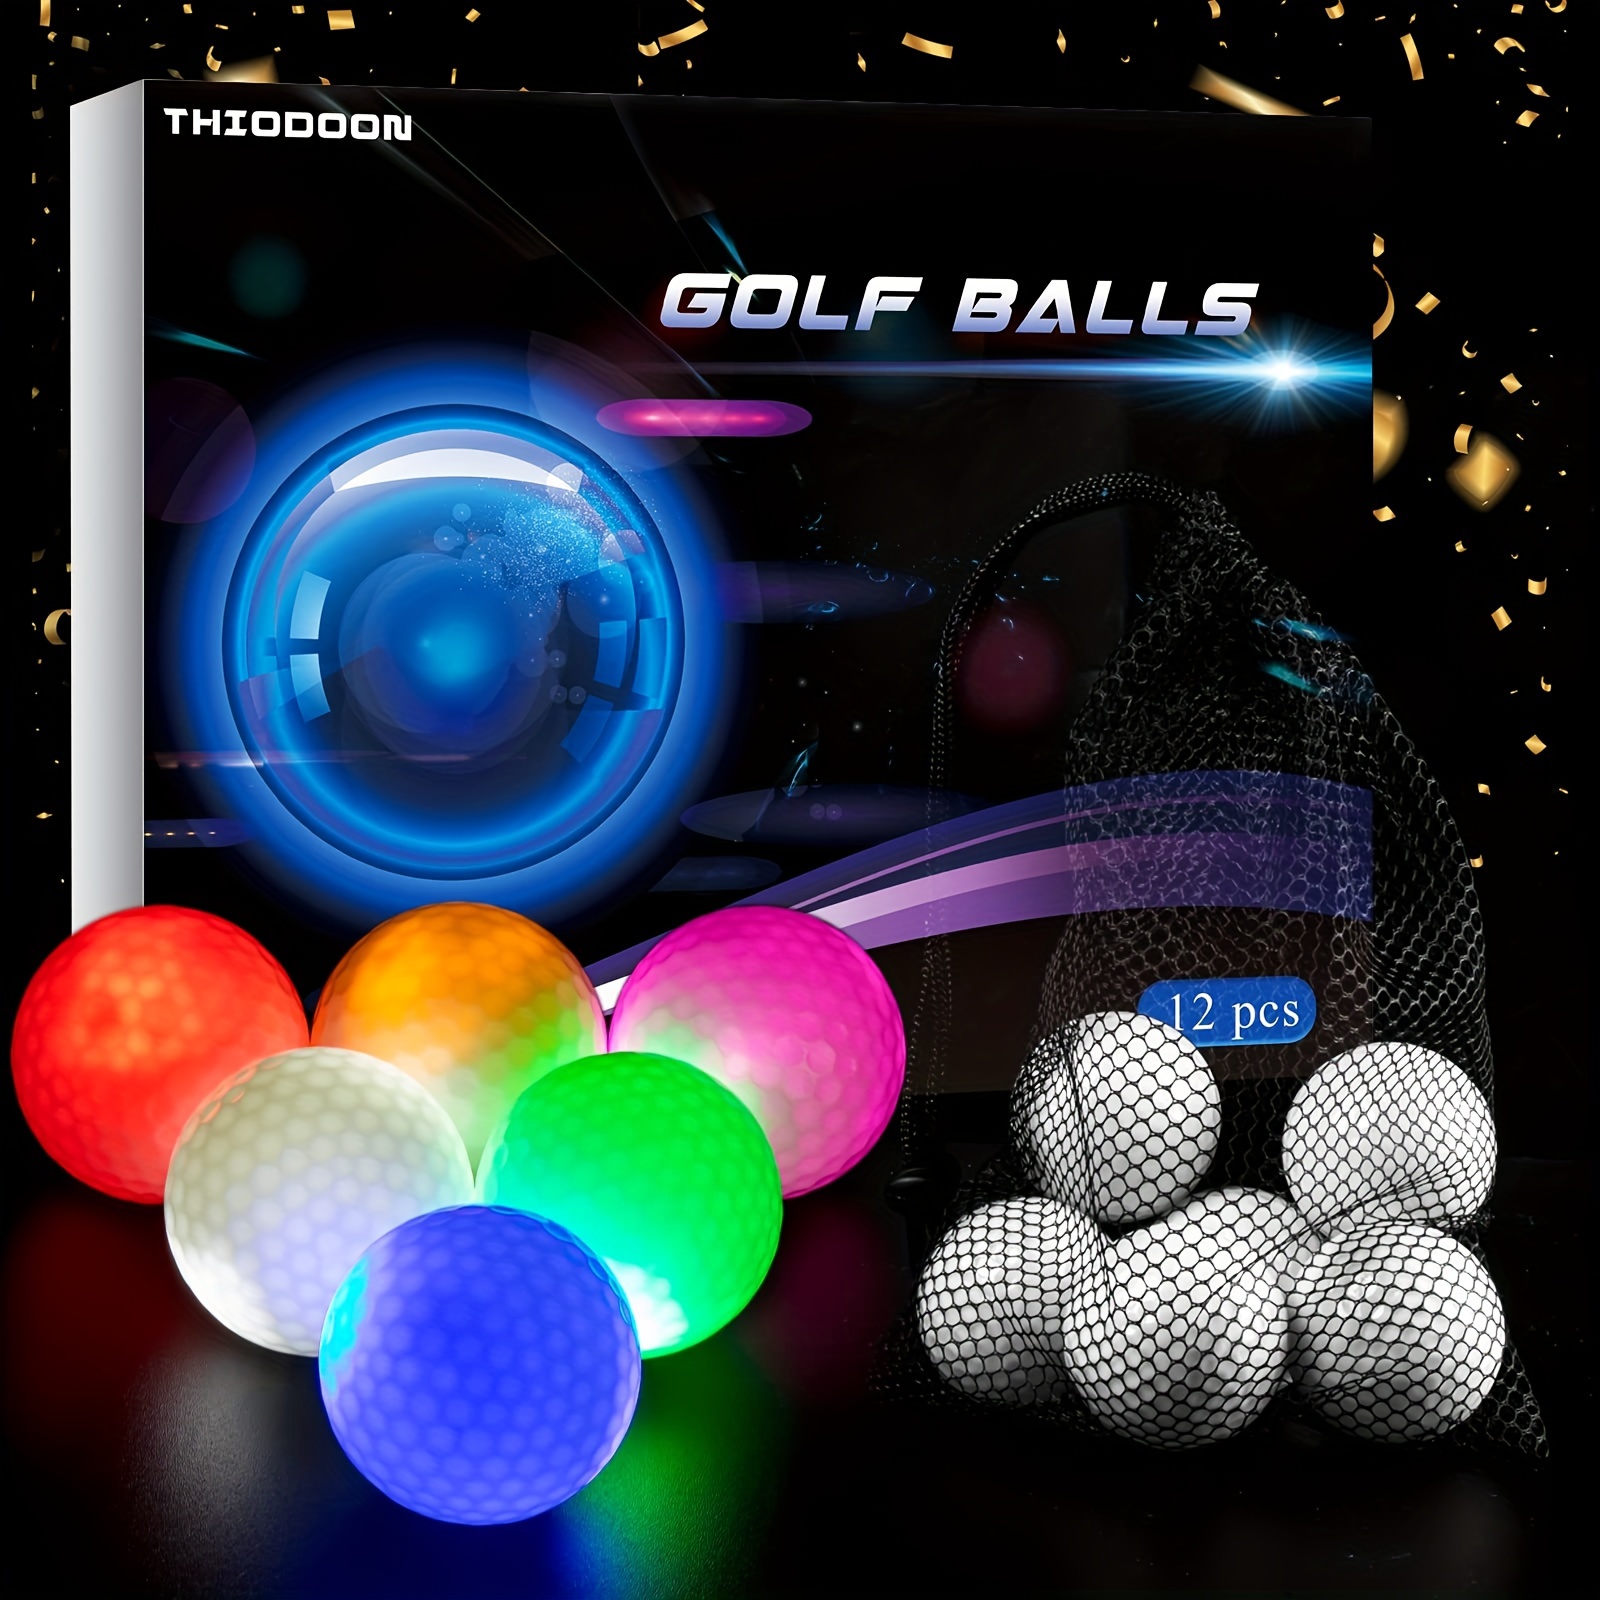 

Thiodoon 12 Pack Glow In The Dark Golf Balls Light Activated 7 Colors Light Up Led Golf Balls No Timer Stay Lit Easy To Turn On And Off With Flashlight Glowing Golf Balls For Night Golfing